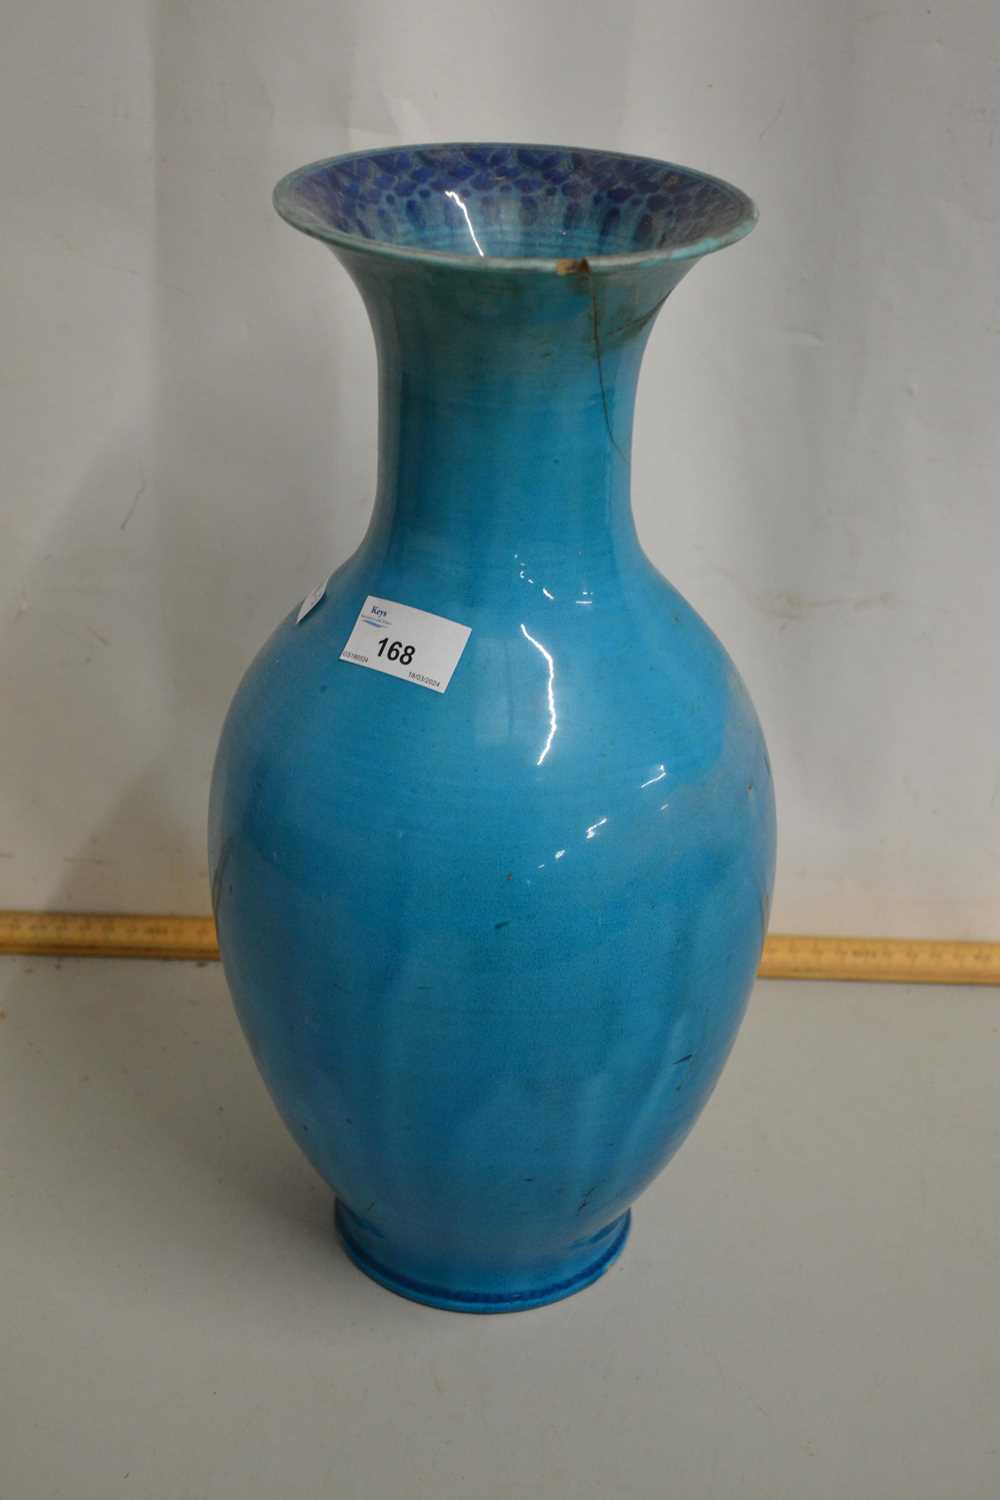 A turquoise glazed Chinese vased, heavily cracked to the rim and re-stuck - 38cm high